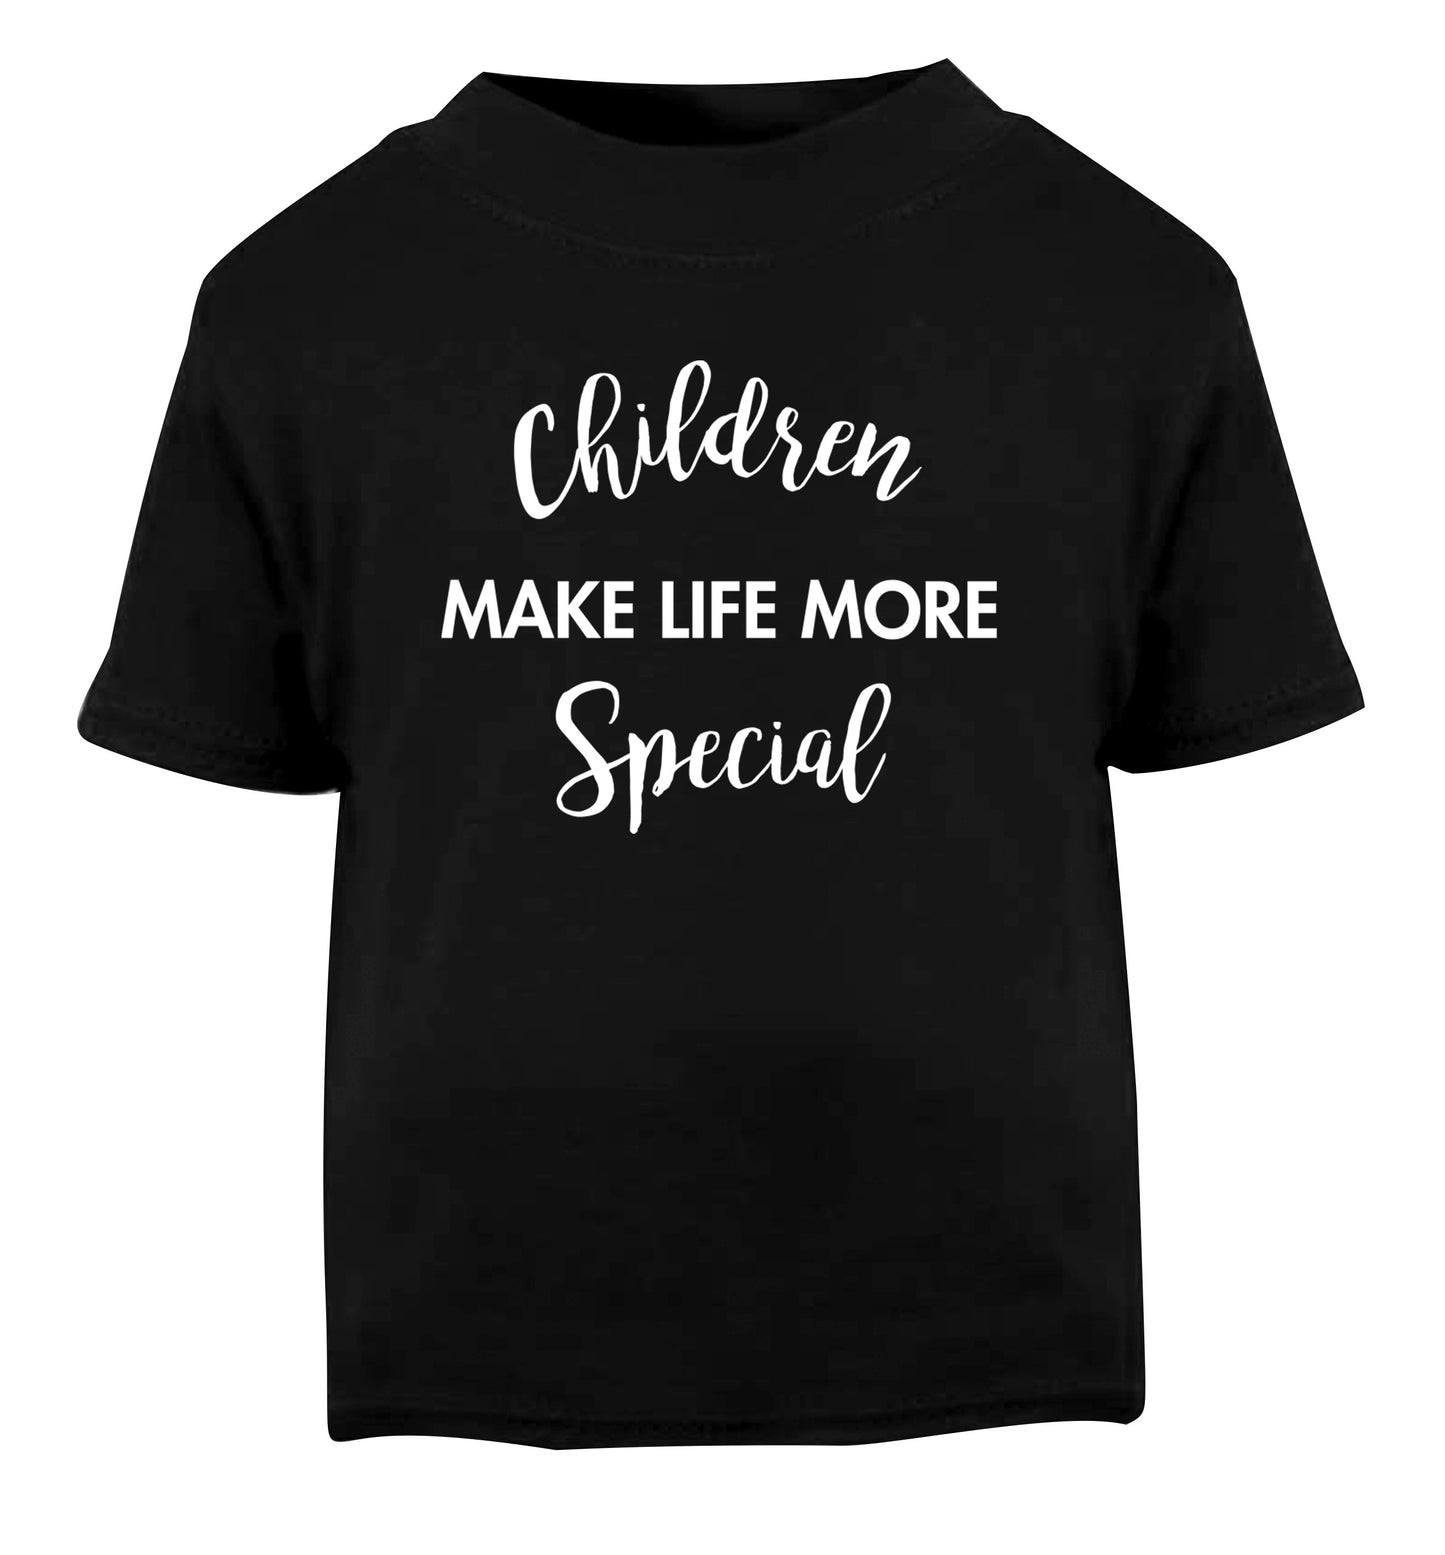 Children make life more special Black Baby Toddler Tshirt 2 years